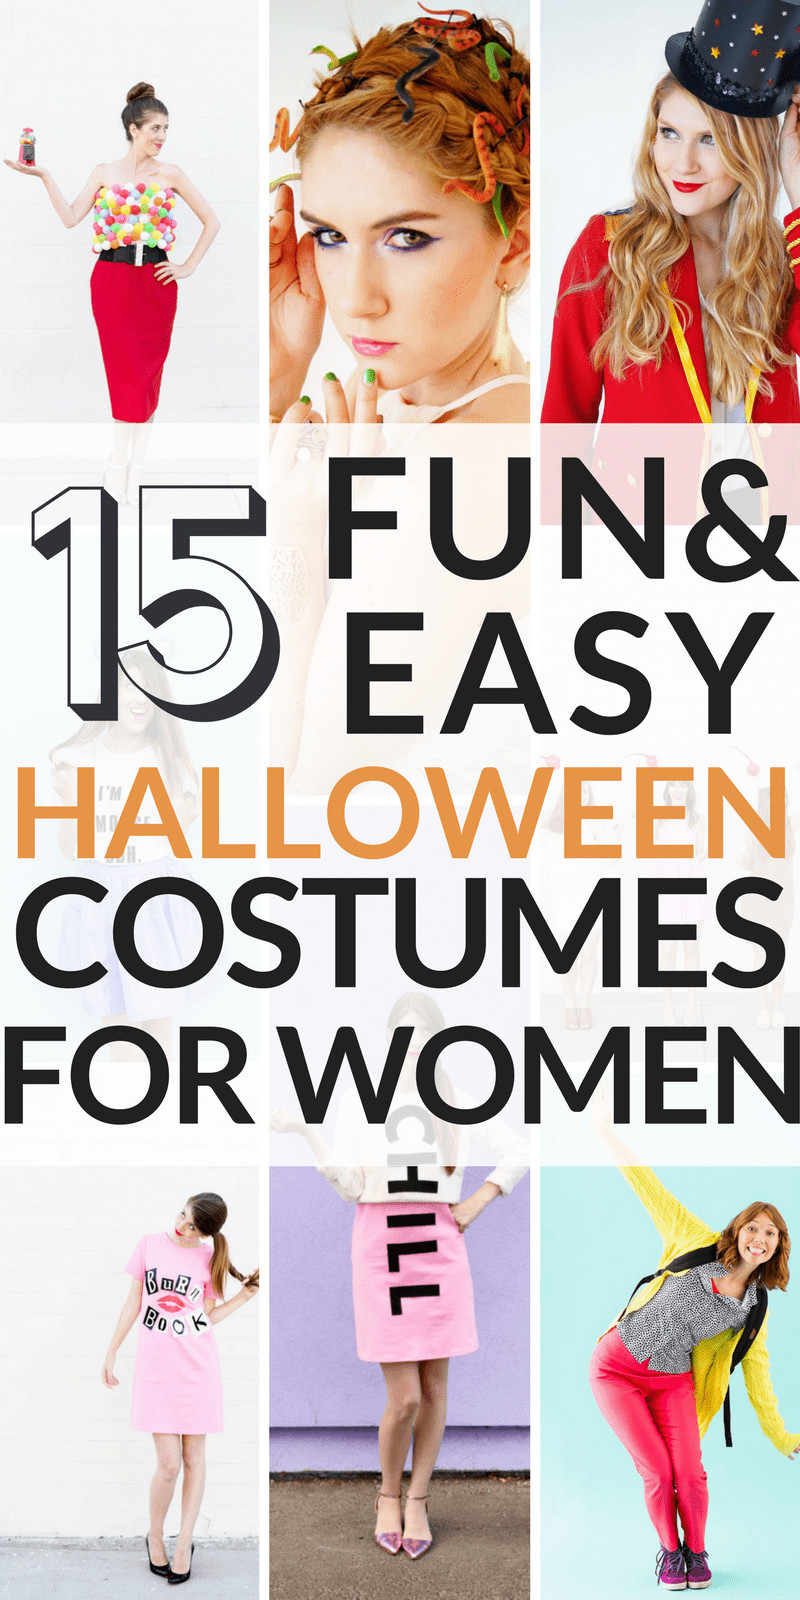 DIY Woman Costume
 15 Cheap and Easy DIY Halloween Costumes for Women